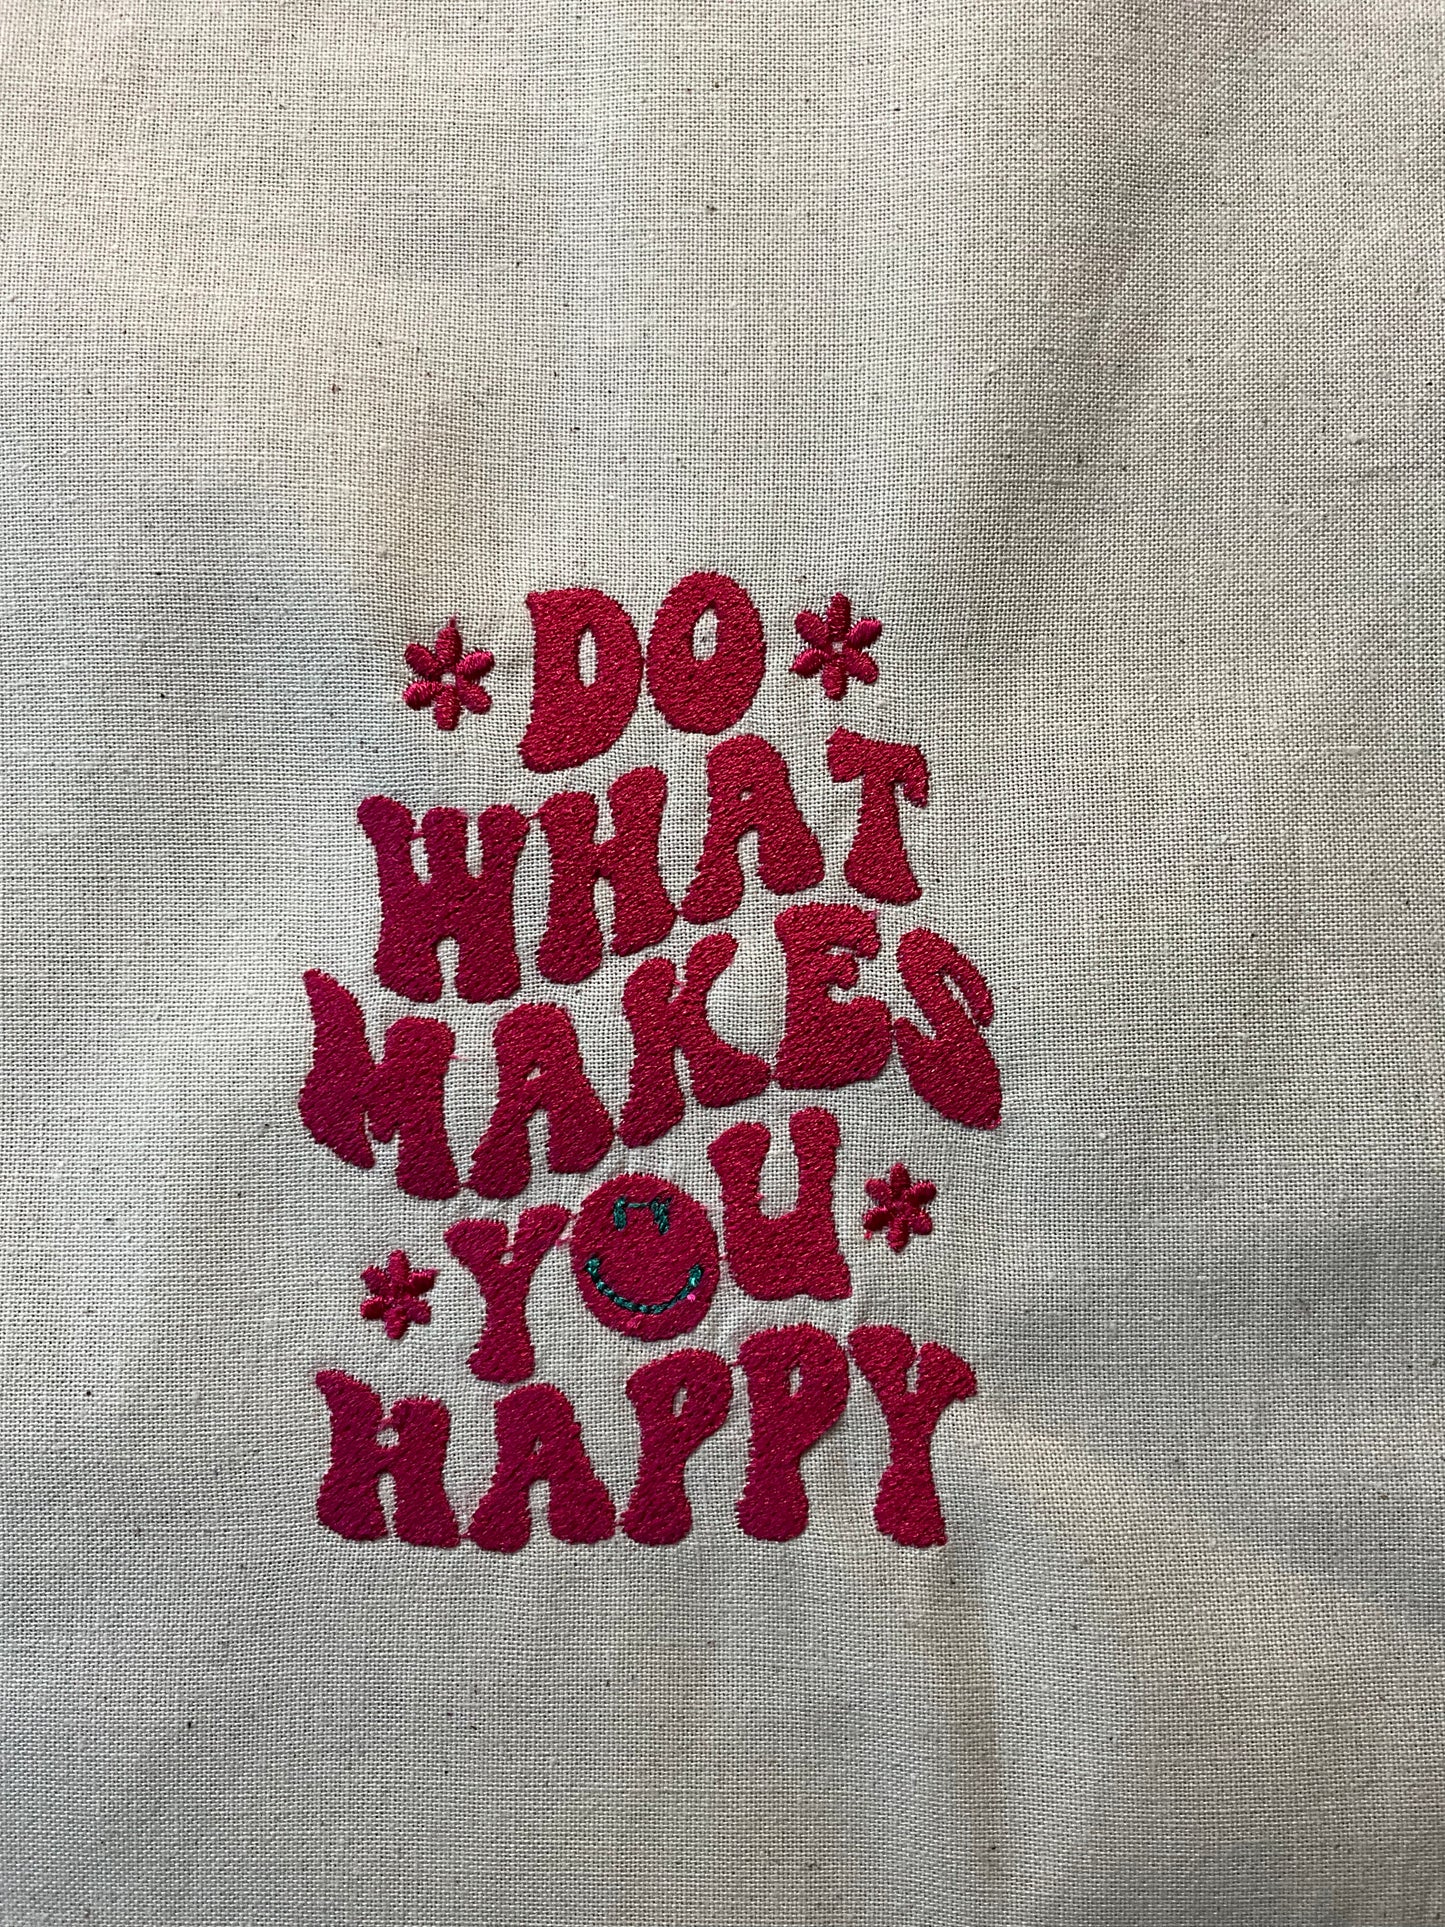 Do What Makes You Happy - Embroidered Tote Bag